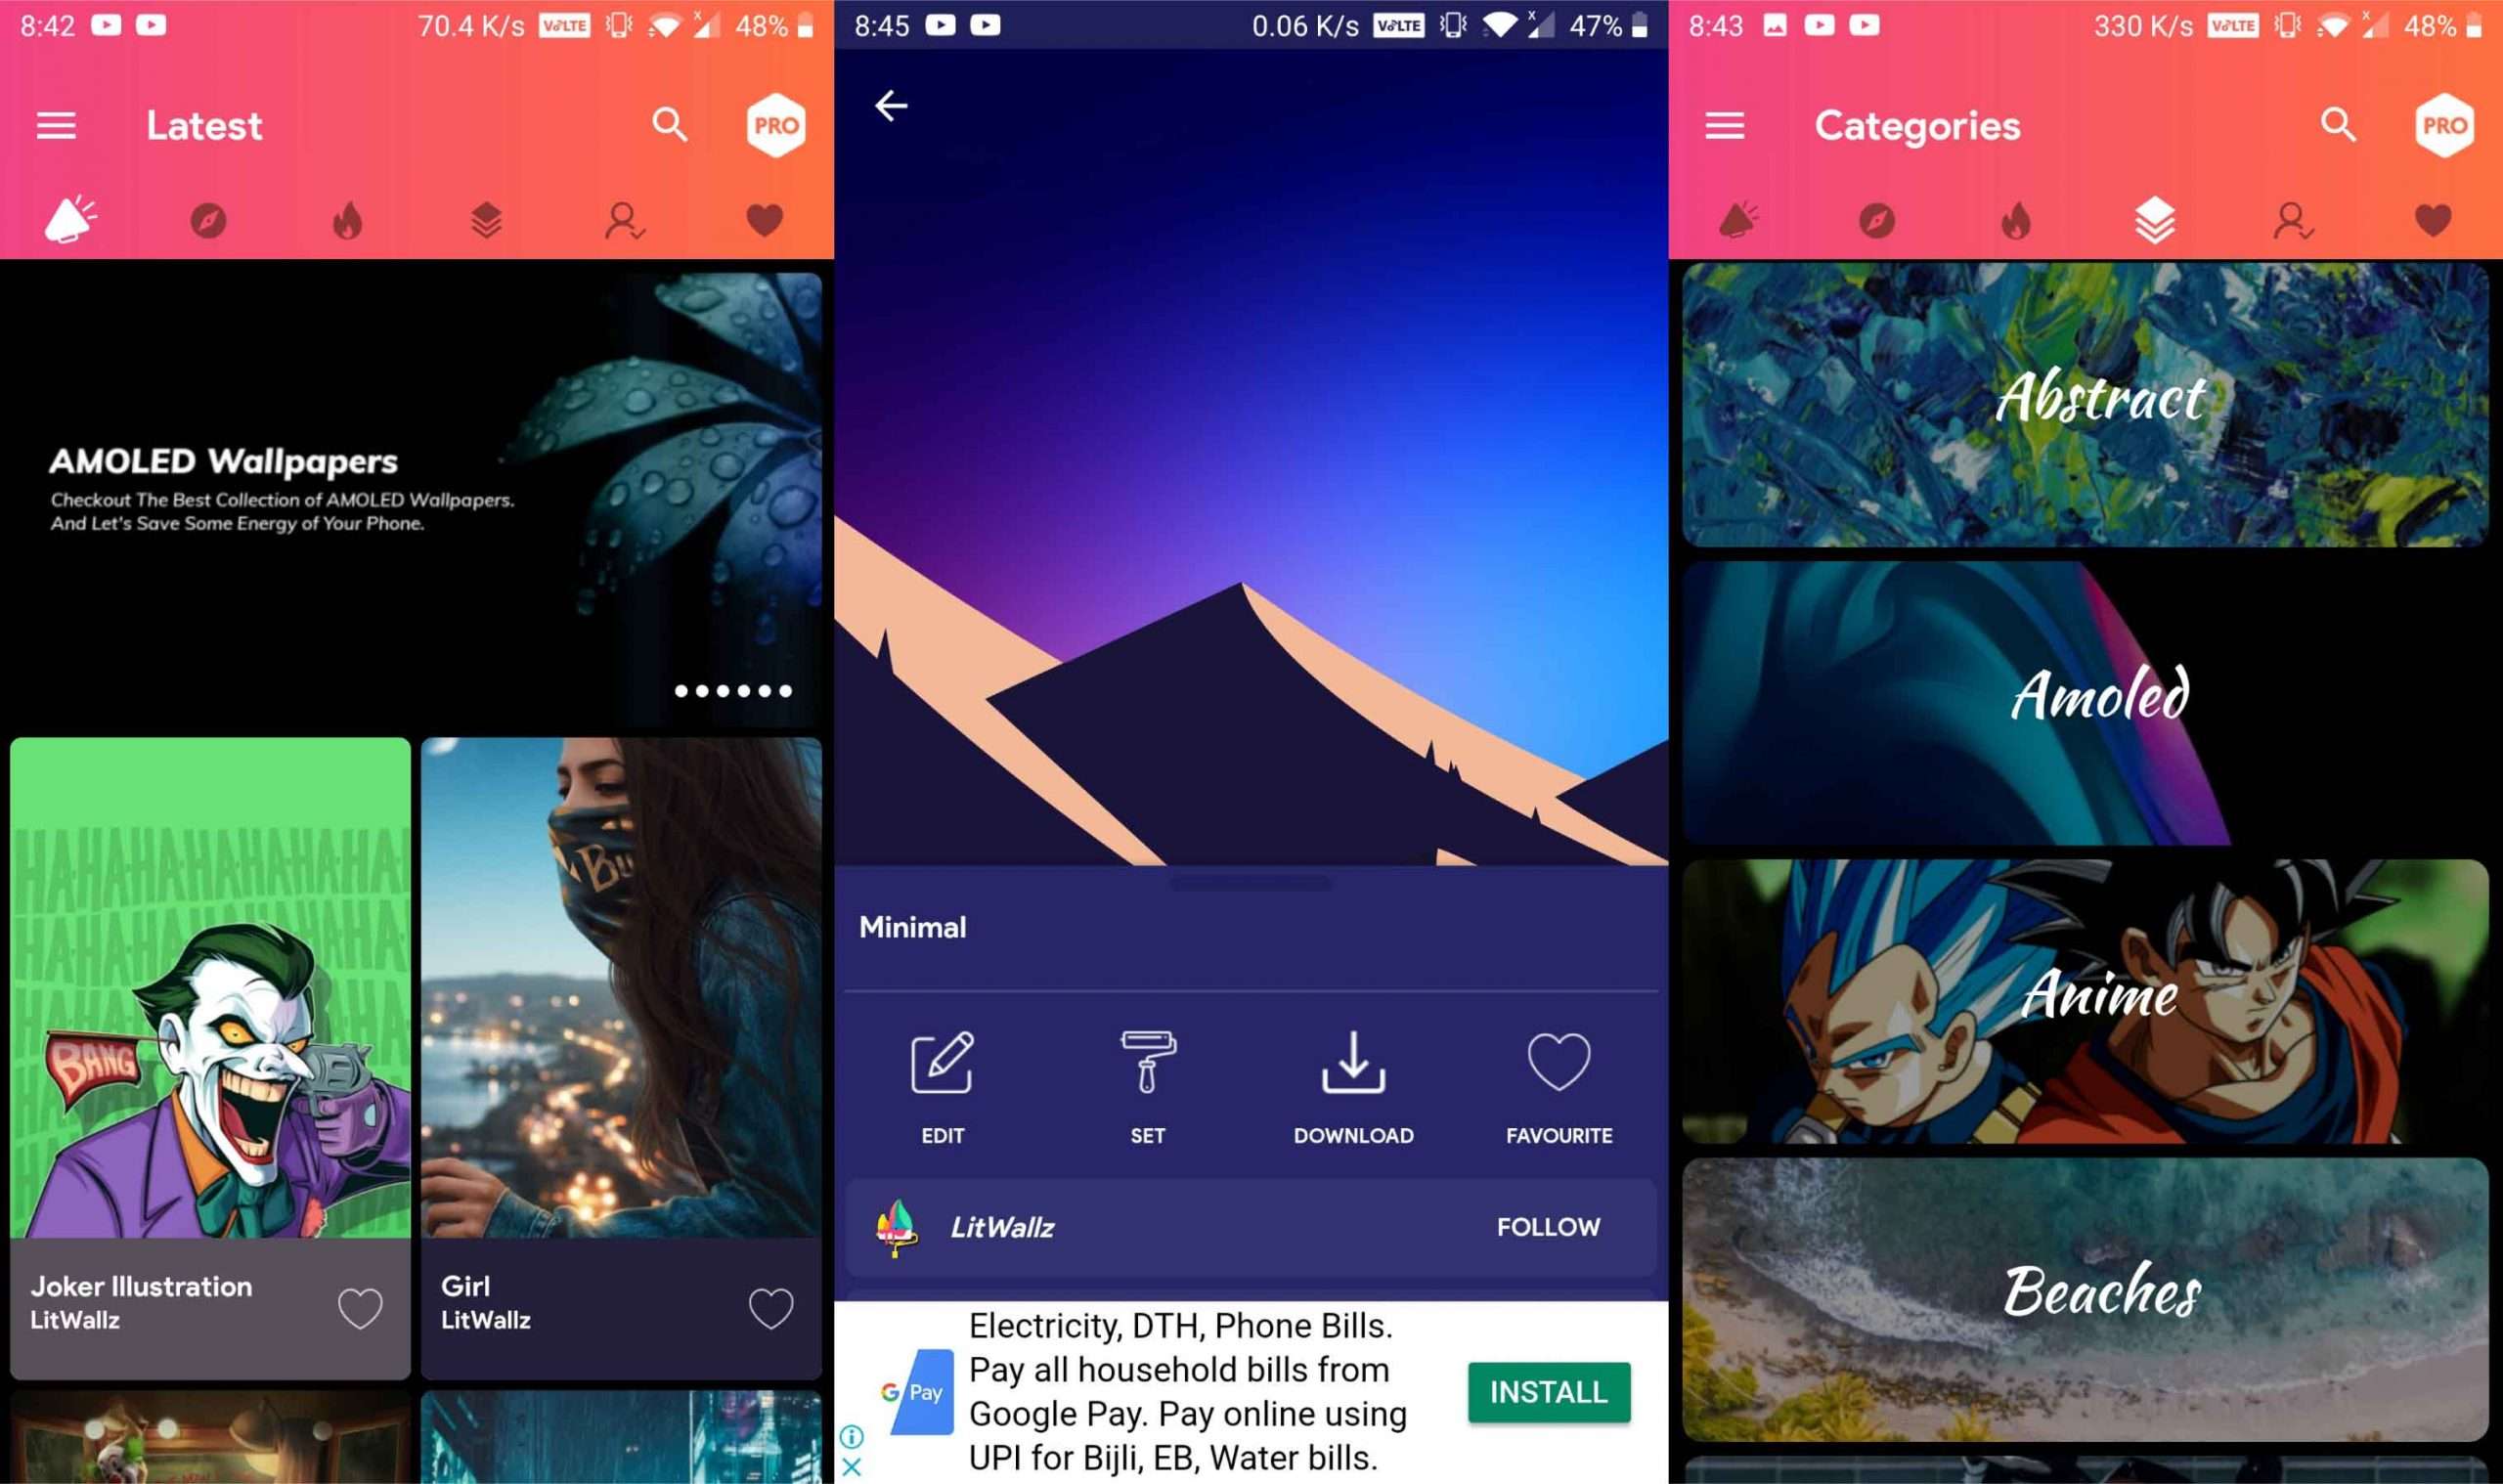 10 Best Android Apps for May 2020 Free + Paid - Tech Baked